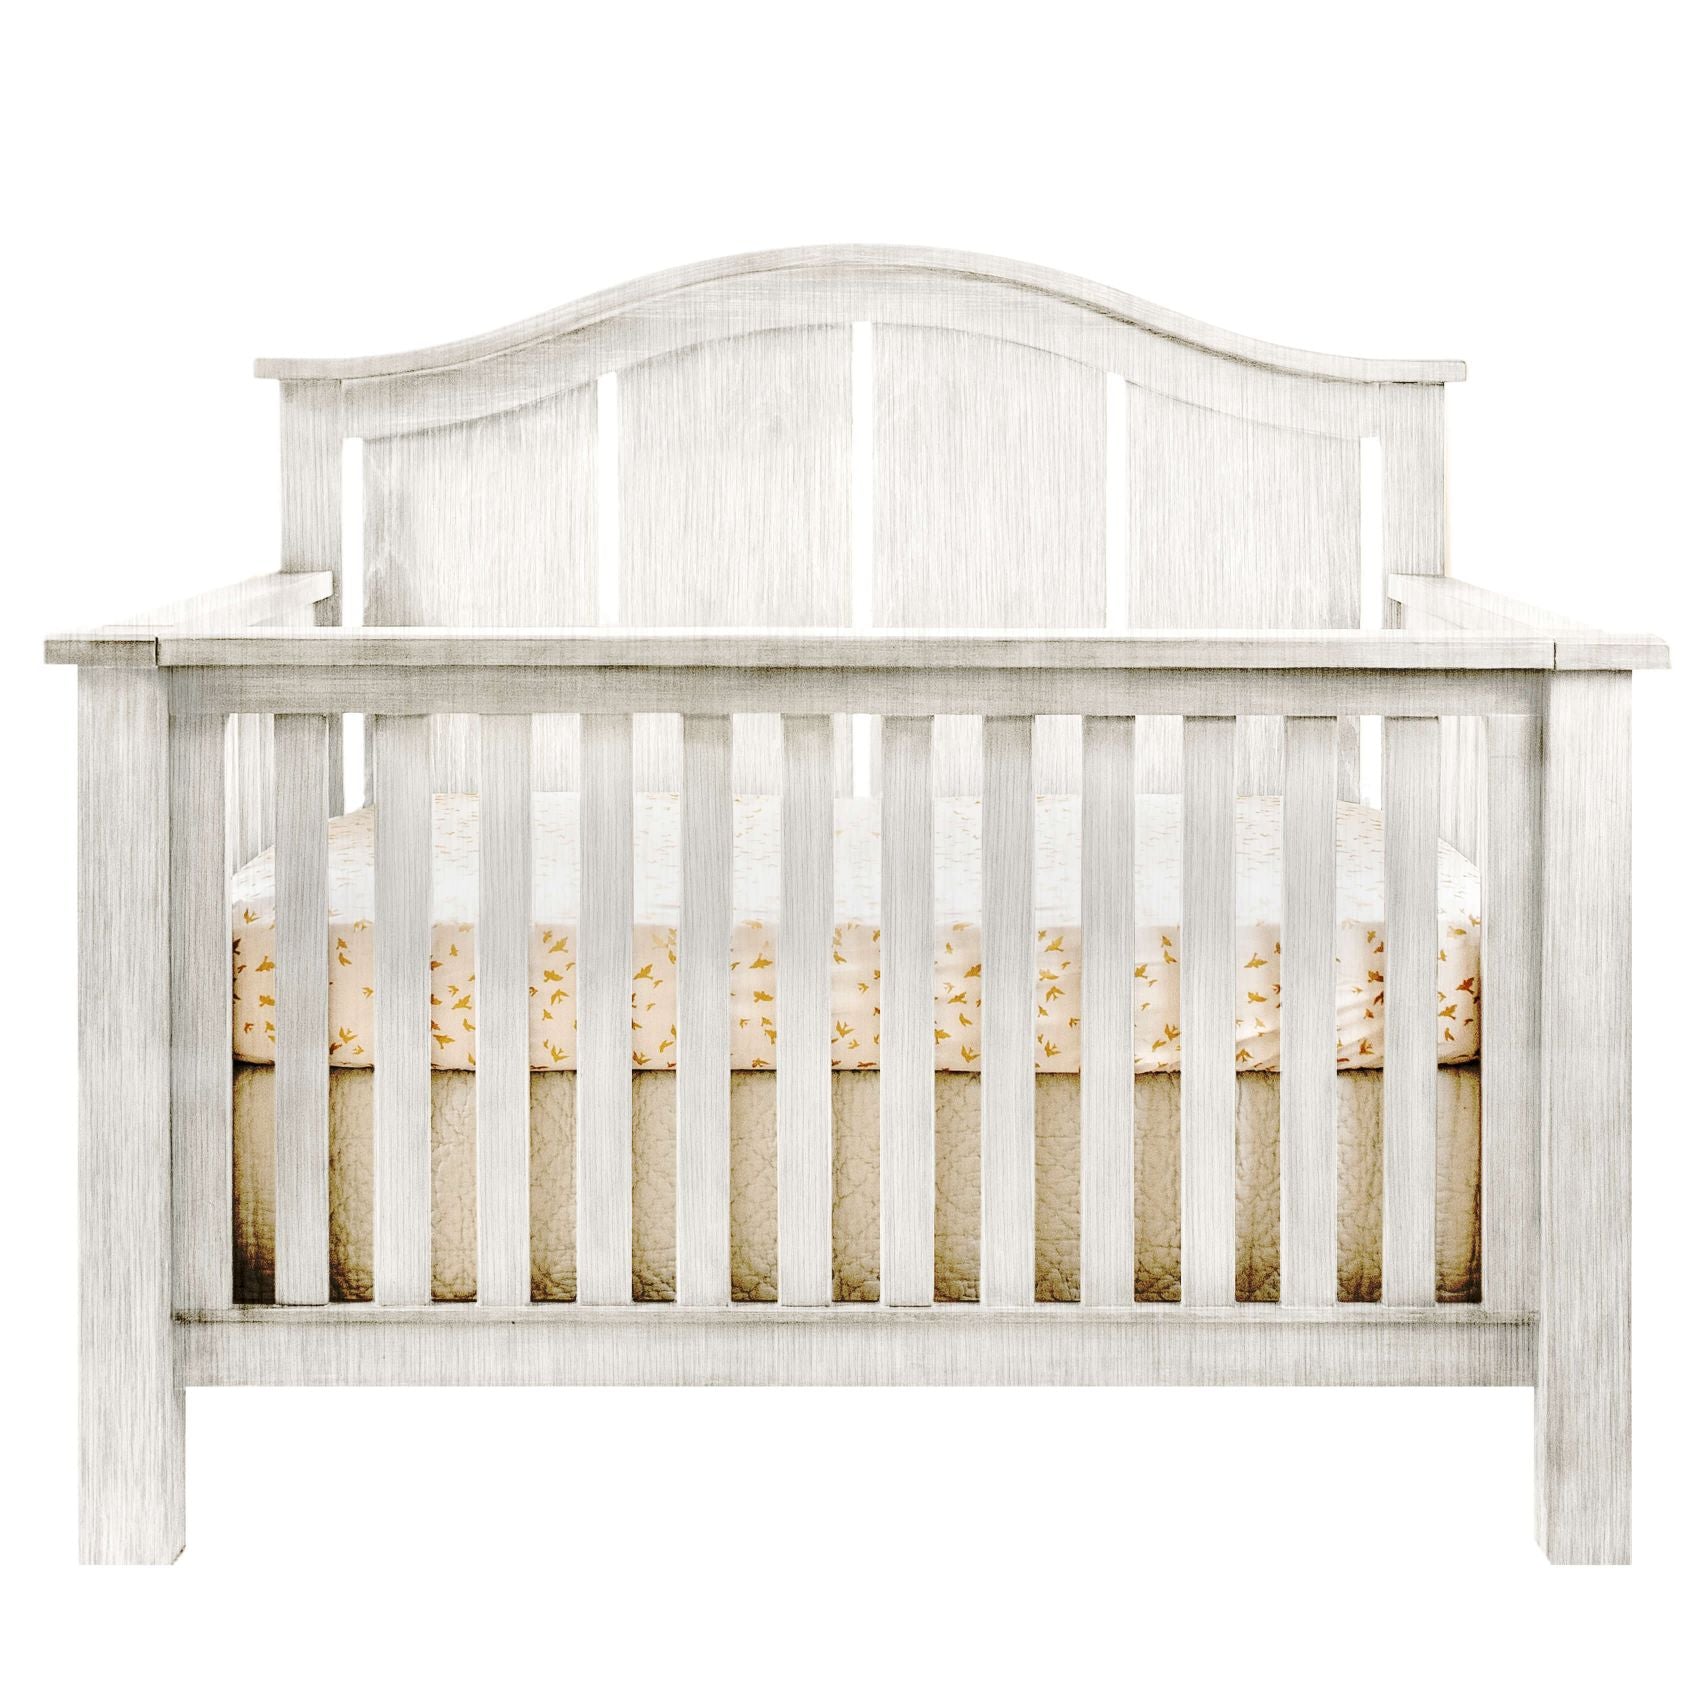 Shop the trend-setting rustic farmhouse crib from the RELIC collection by Milk Street Baby.